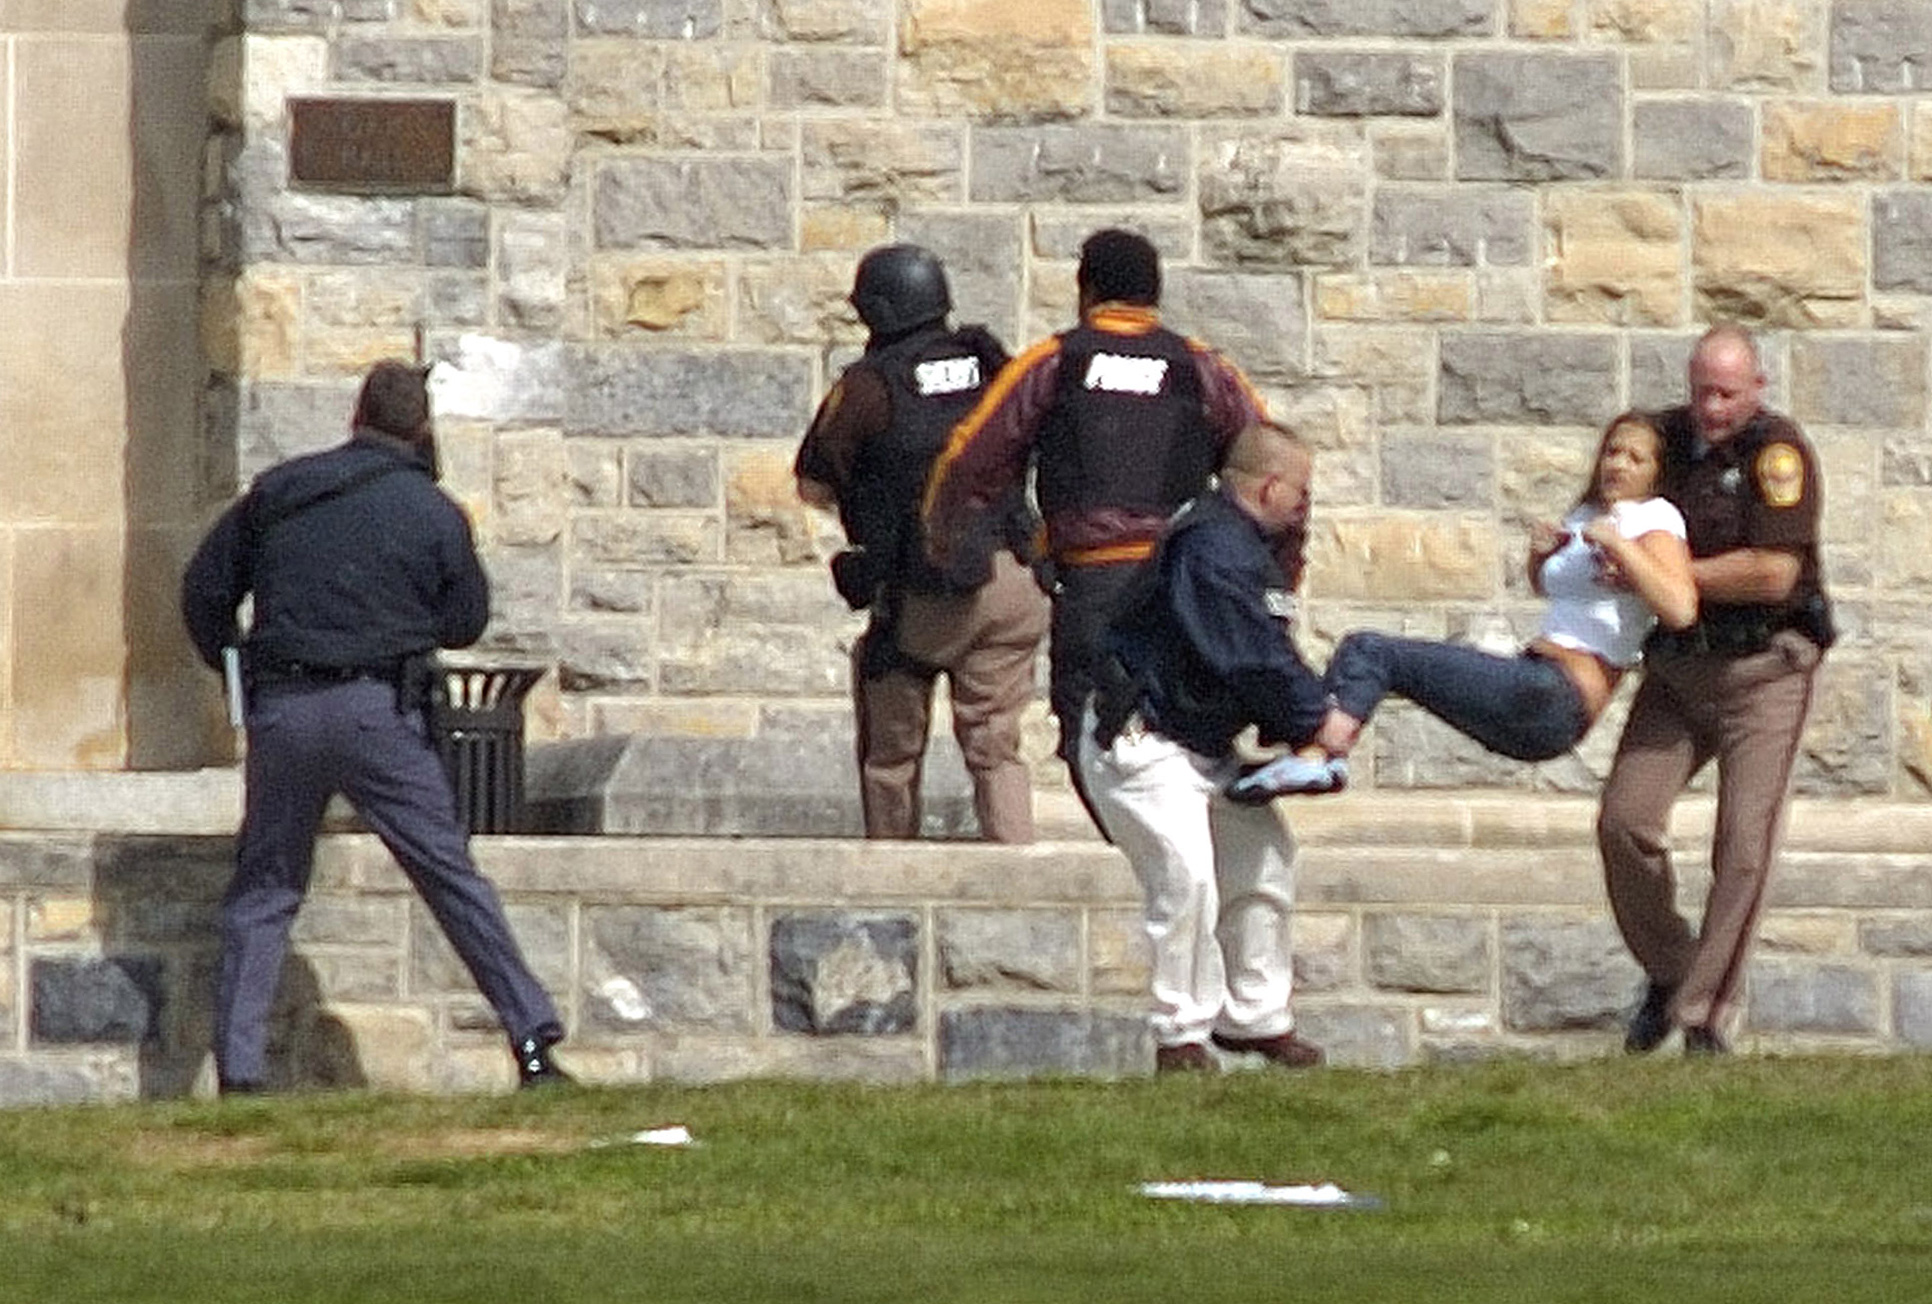 PHOTO: An injured person is carried out of Norris Hall at Virginia Tech in Blacksburg, Va., April 16, 2007. Seung-Hui Cho, a senior at the school, killed 32 people before killing himself.   